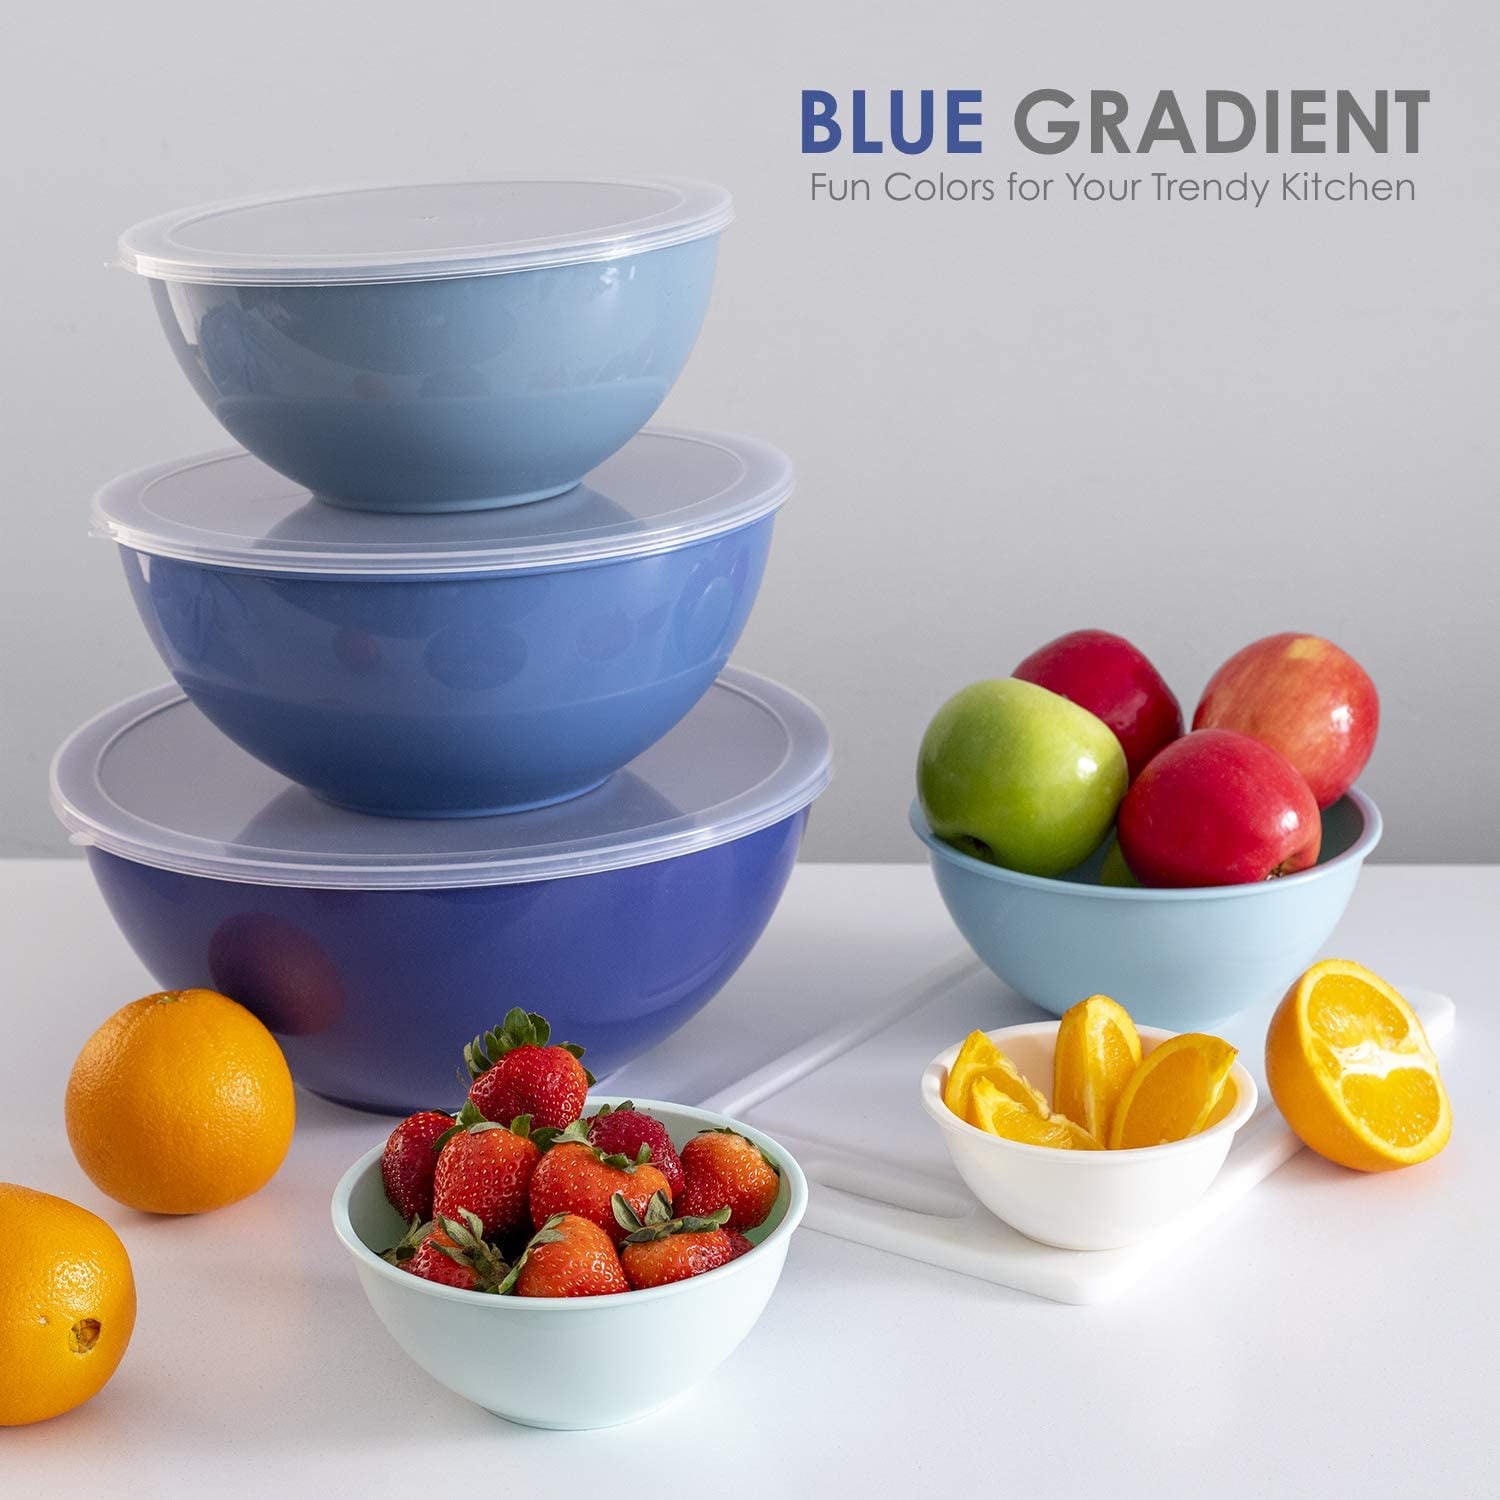 Rae Dunn Mixing Bowls with Lids - 10 Piece Plastic Nesting Bowls Set  includes 5 Prep Bowls and 5 Lids (Blue Ombre)